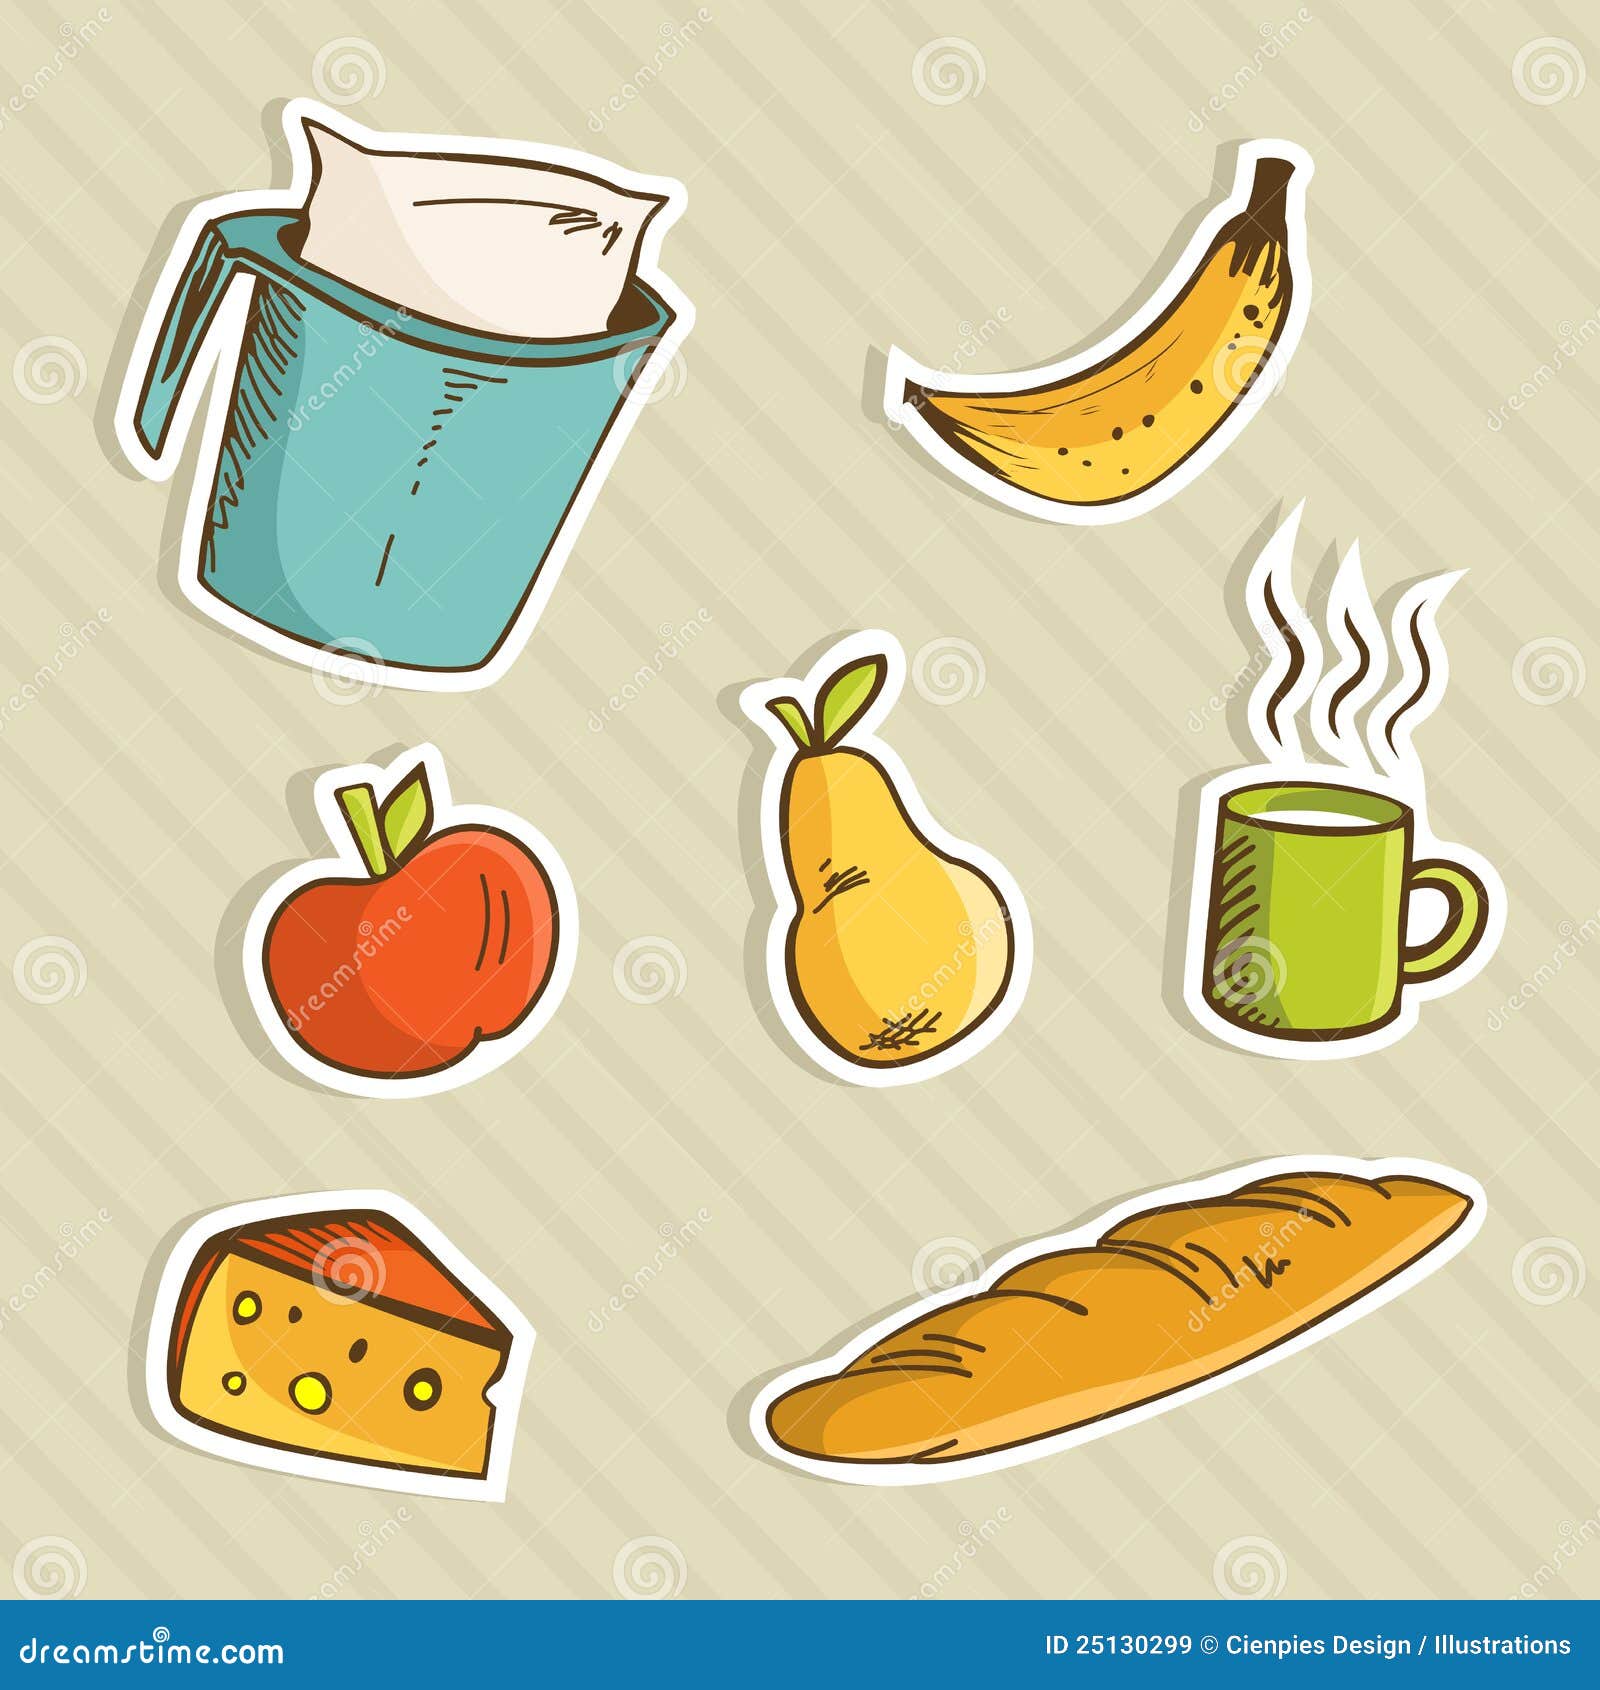 Healthy Cartoon Food Royalty Free Stock Images - Image: 25130299